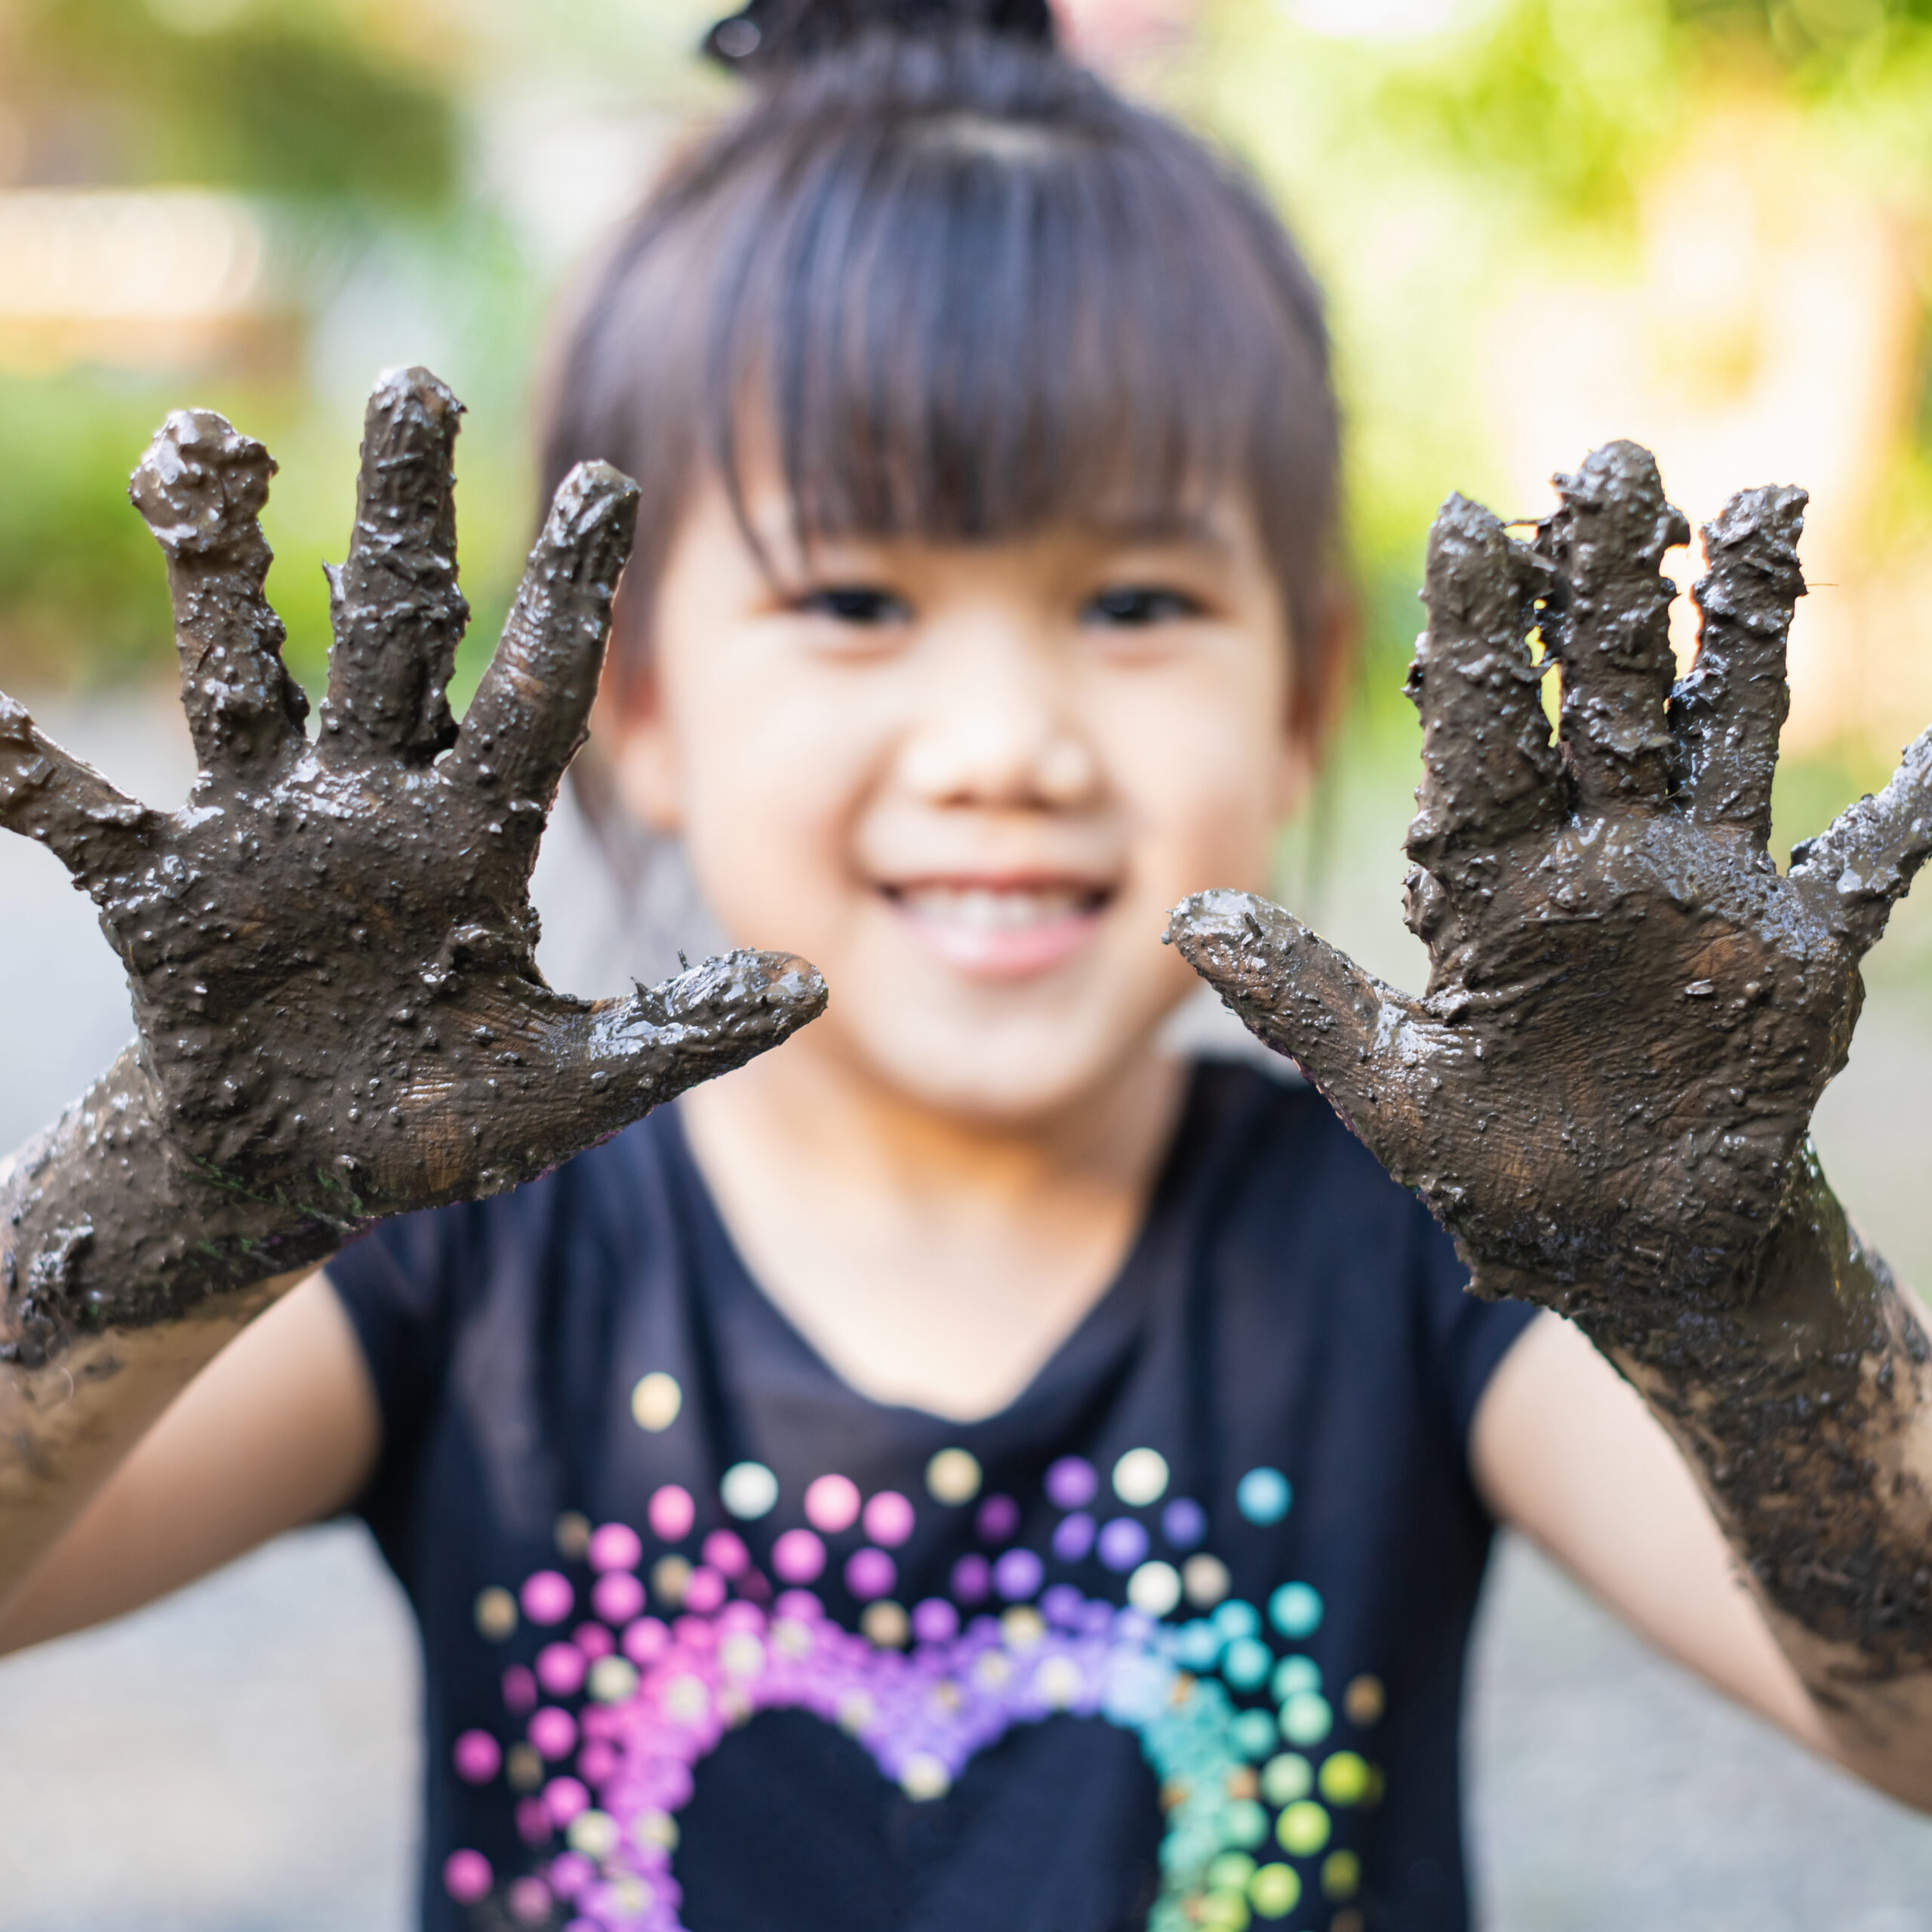 Smiling kid with muddy hands